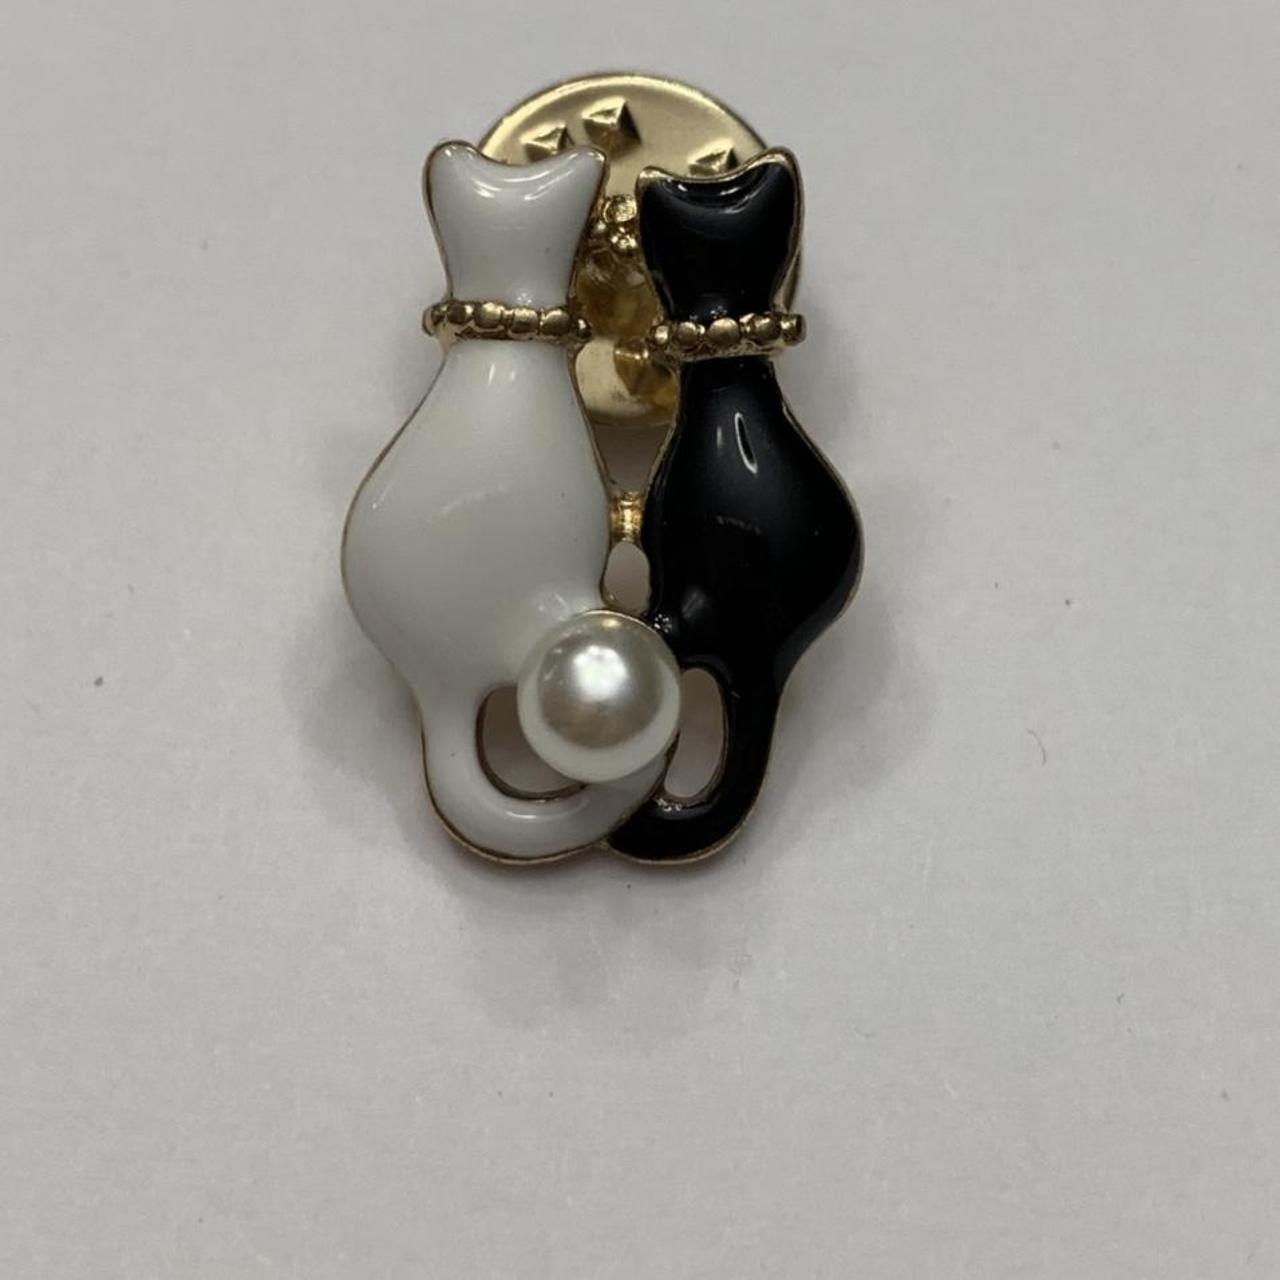 Unbranded Women's Black and White Jewellery